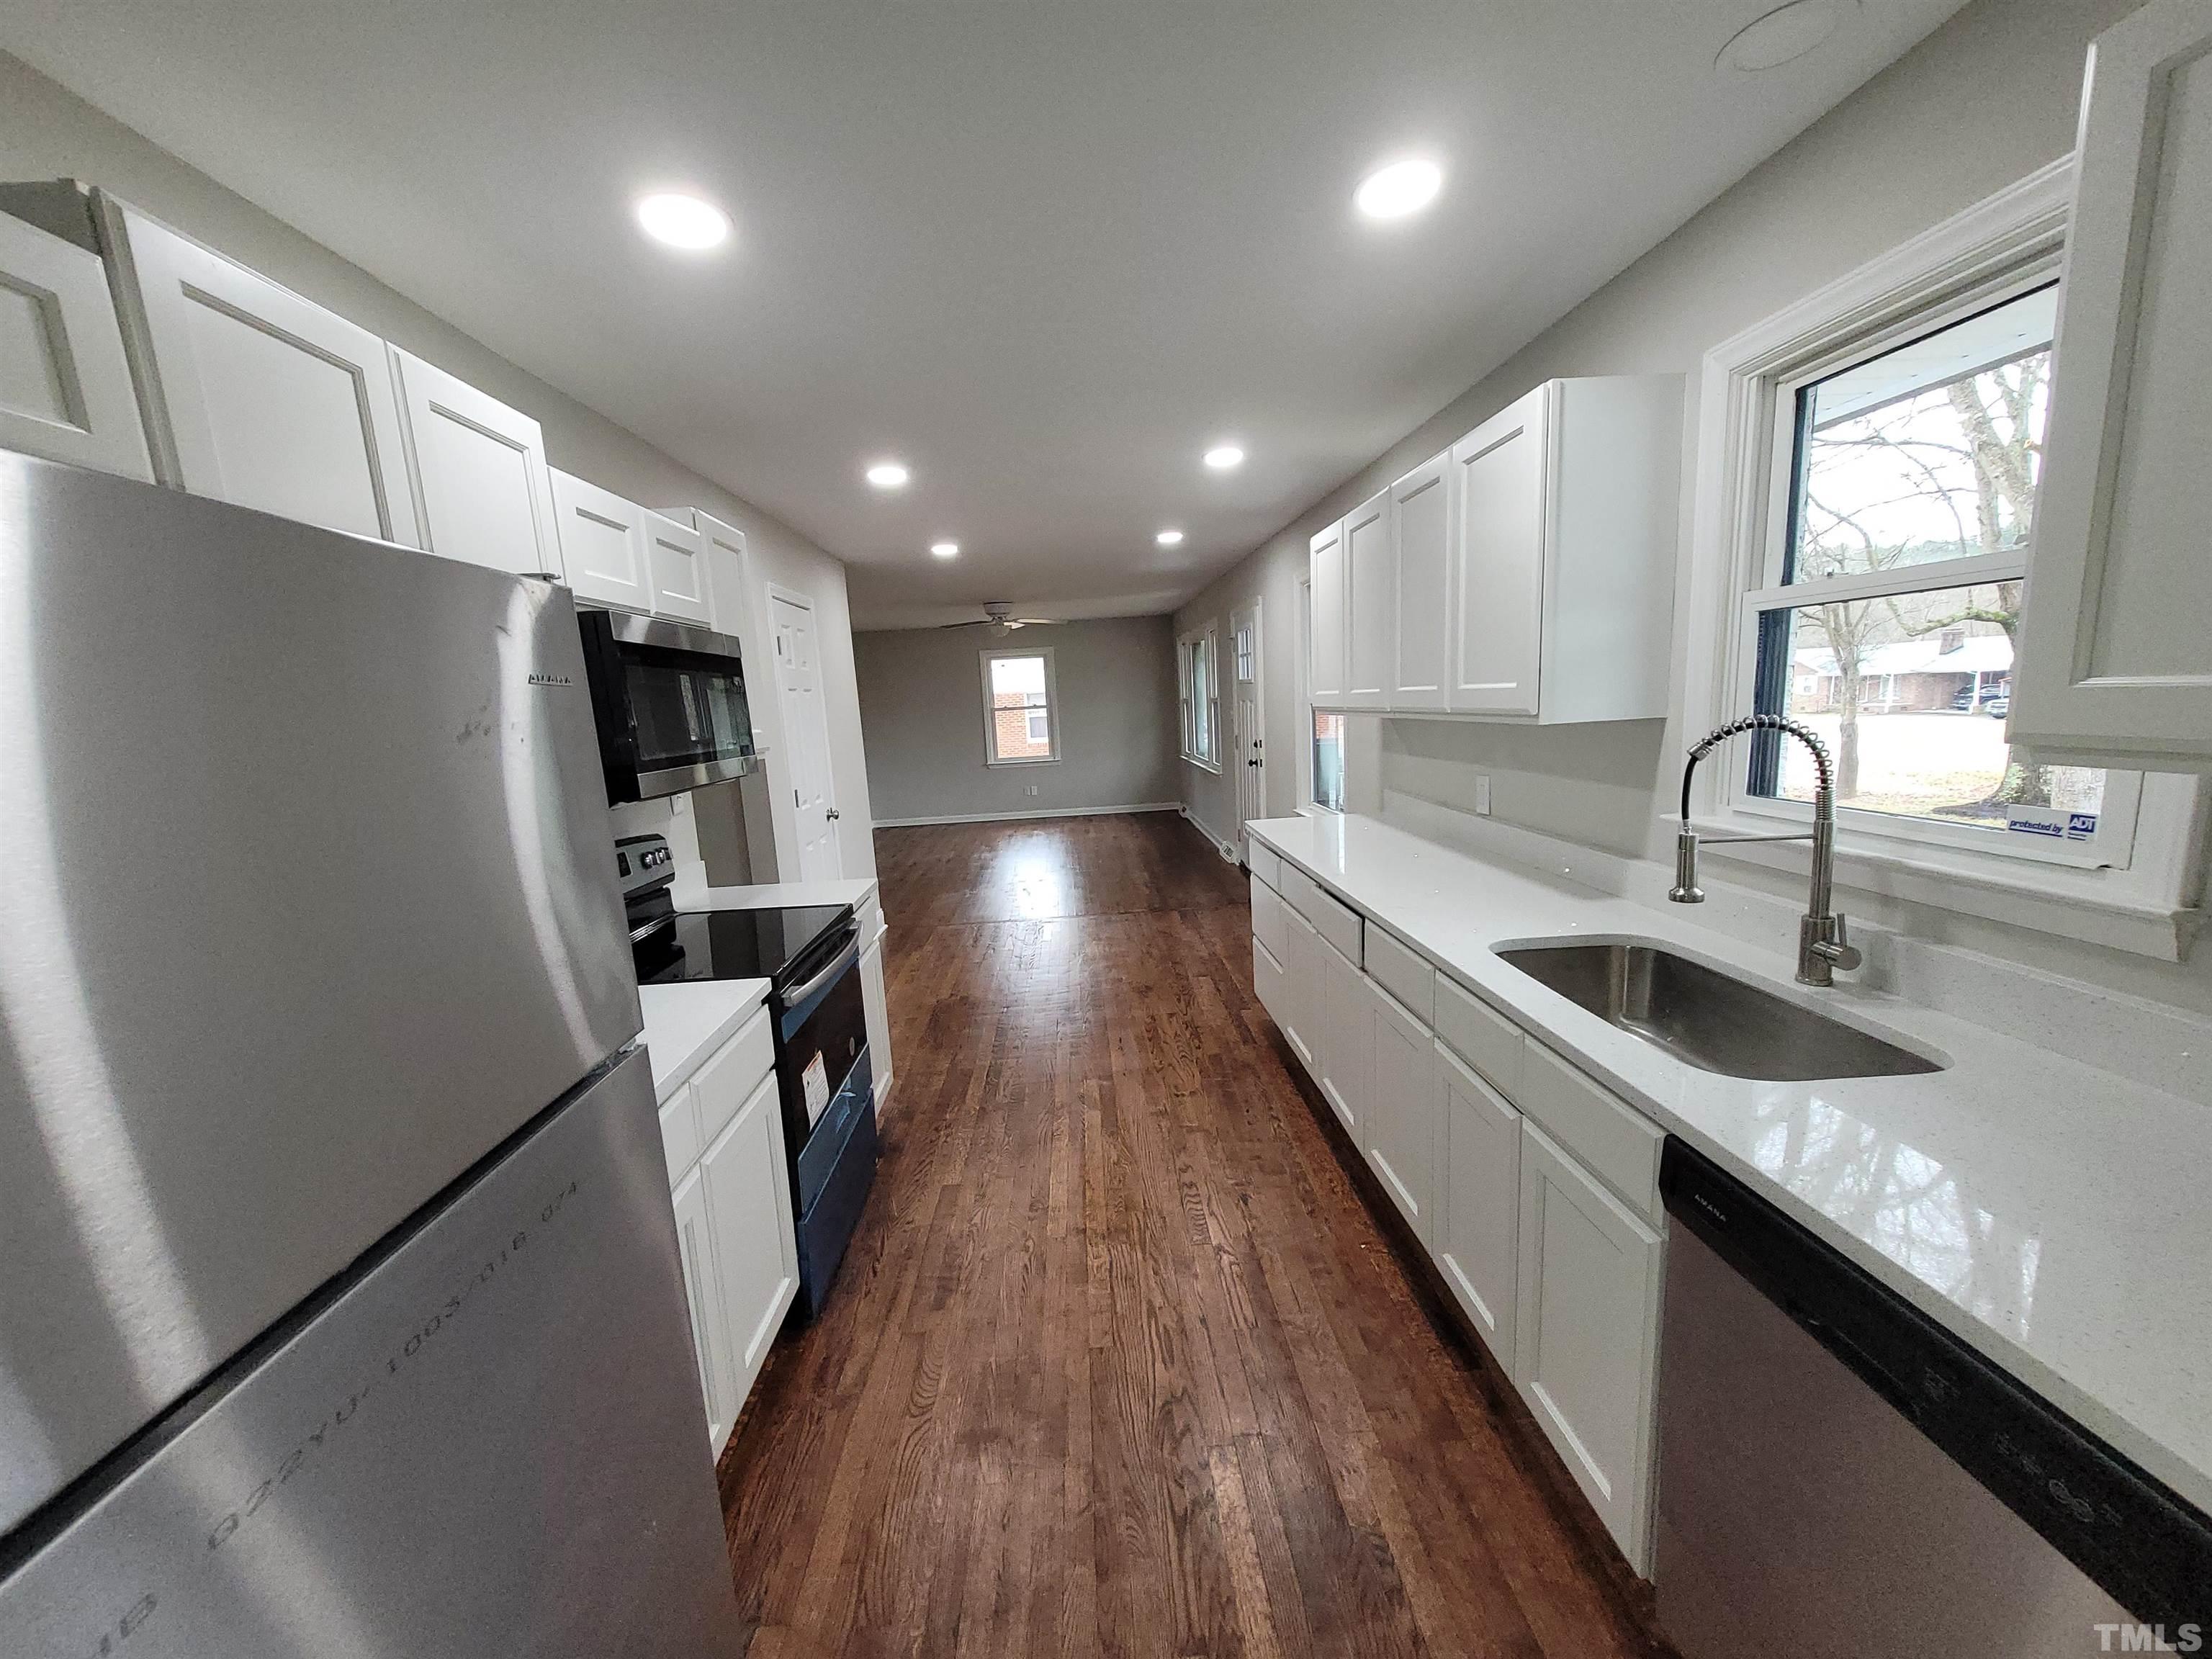 a large kitchen with stainless steel appliances a sink a refrigerator and a counter top space